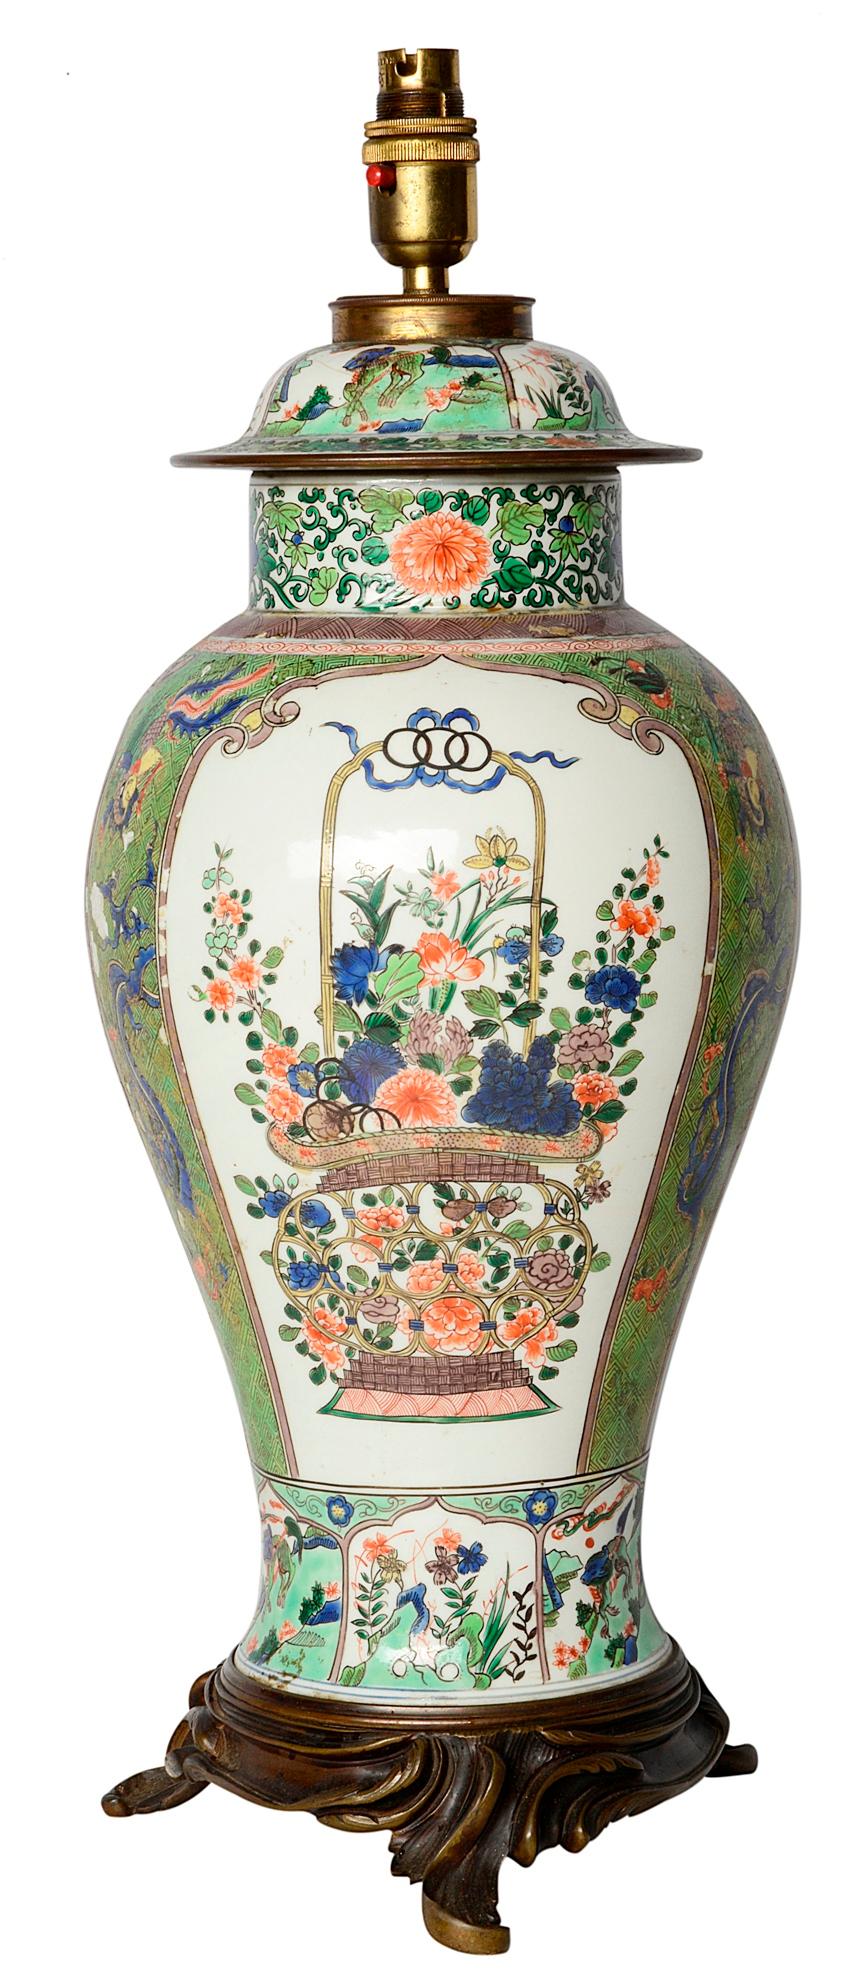 A very good quality early 19th century Samson porcelain lidded vase in the Chinese famille verte style. Having two inset painted panels each with a basket of wonderful exotic coloured flowers, a green ground with mythical dragons, birds and